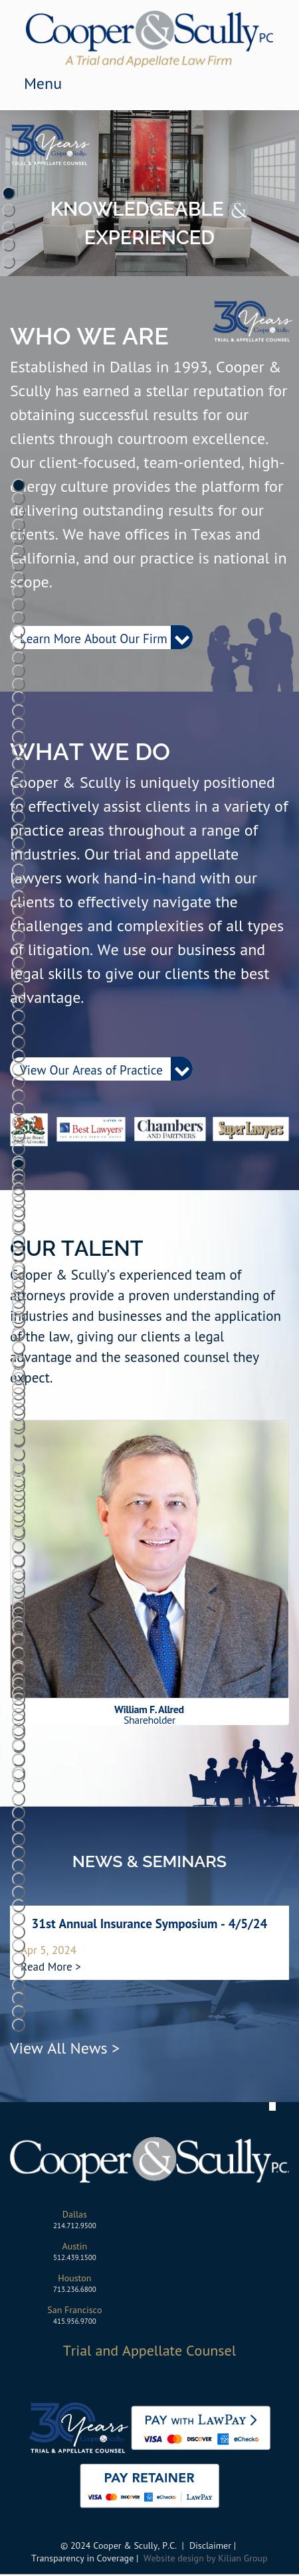 Cooper & Scully, P.C. - San Francisco CA Lawyers